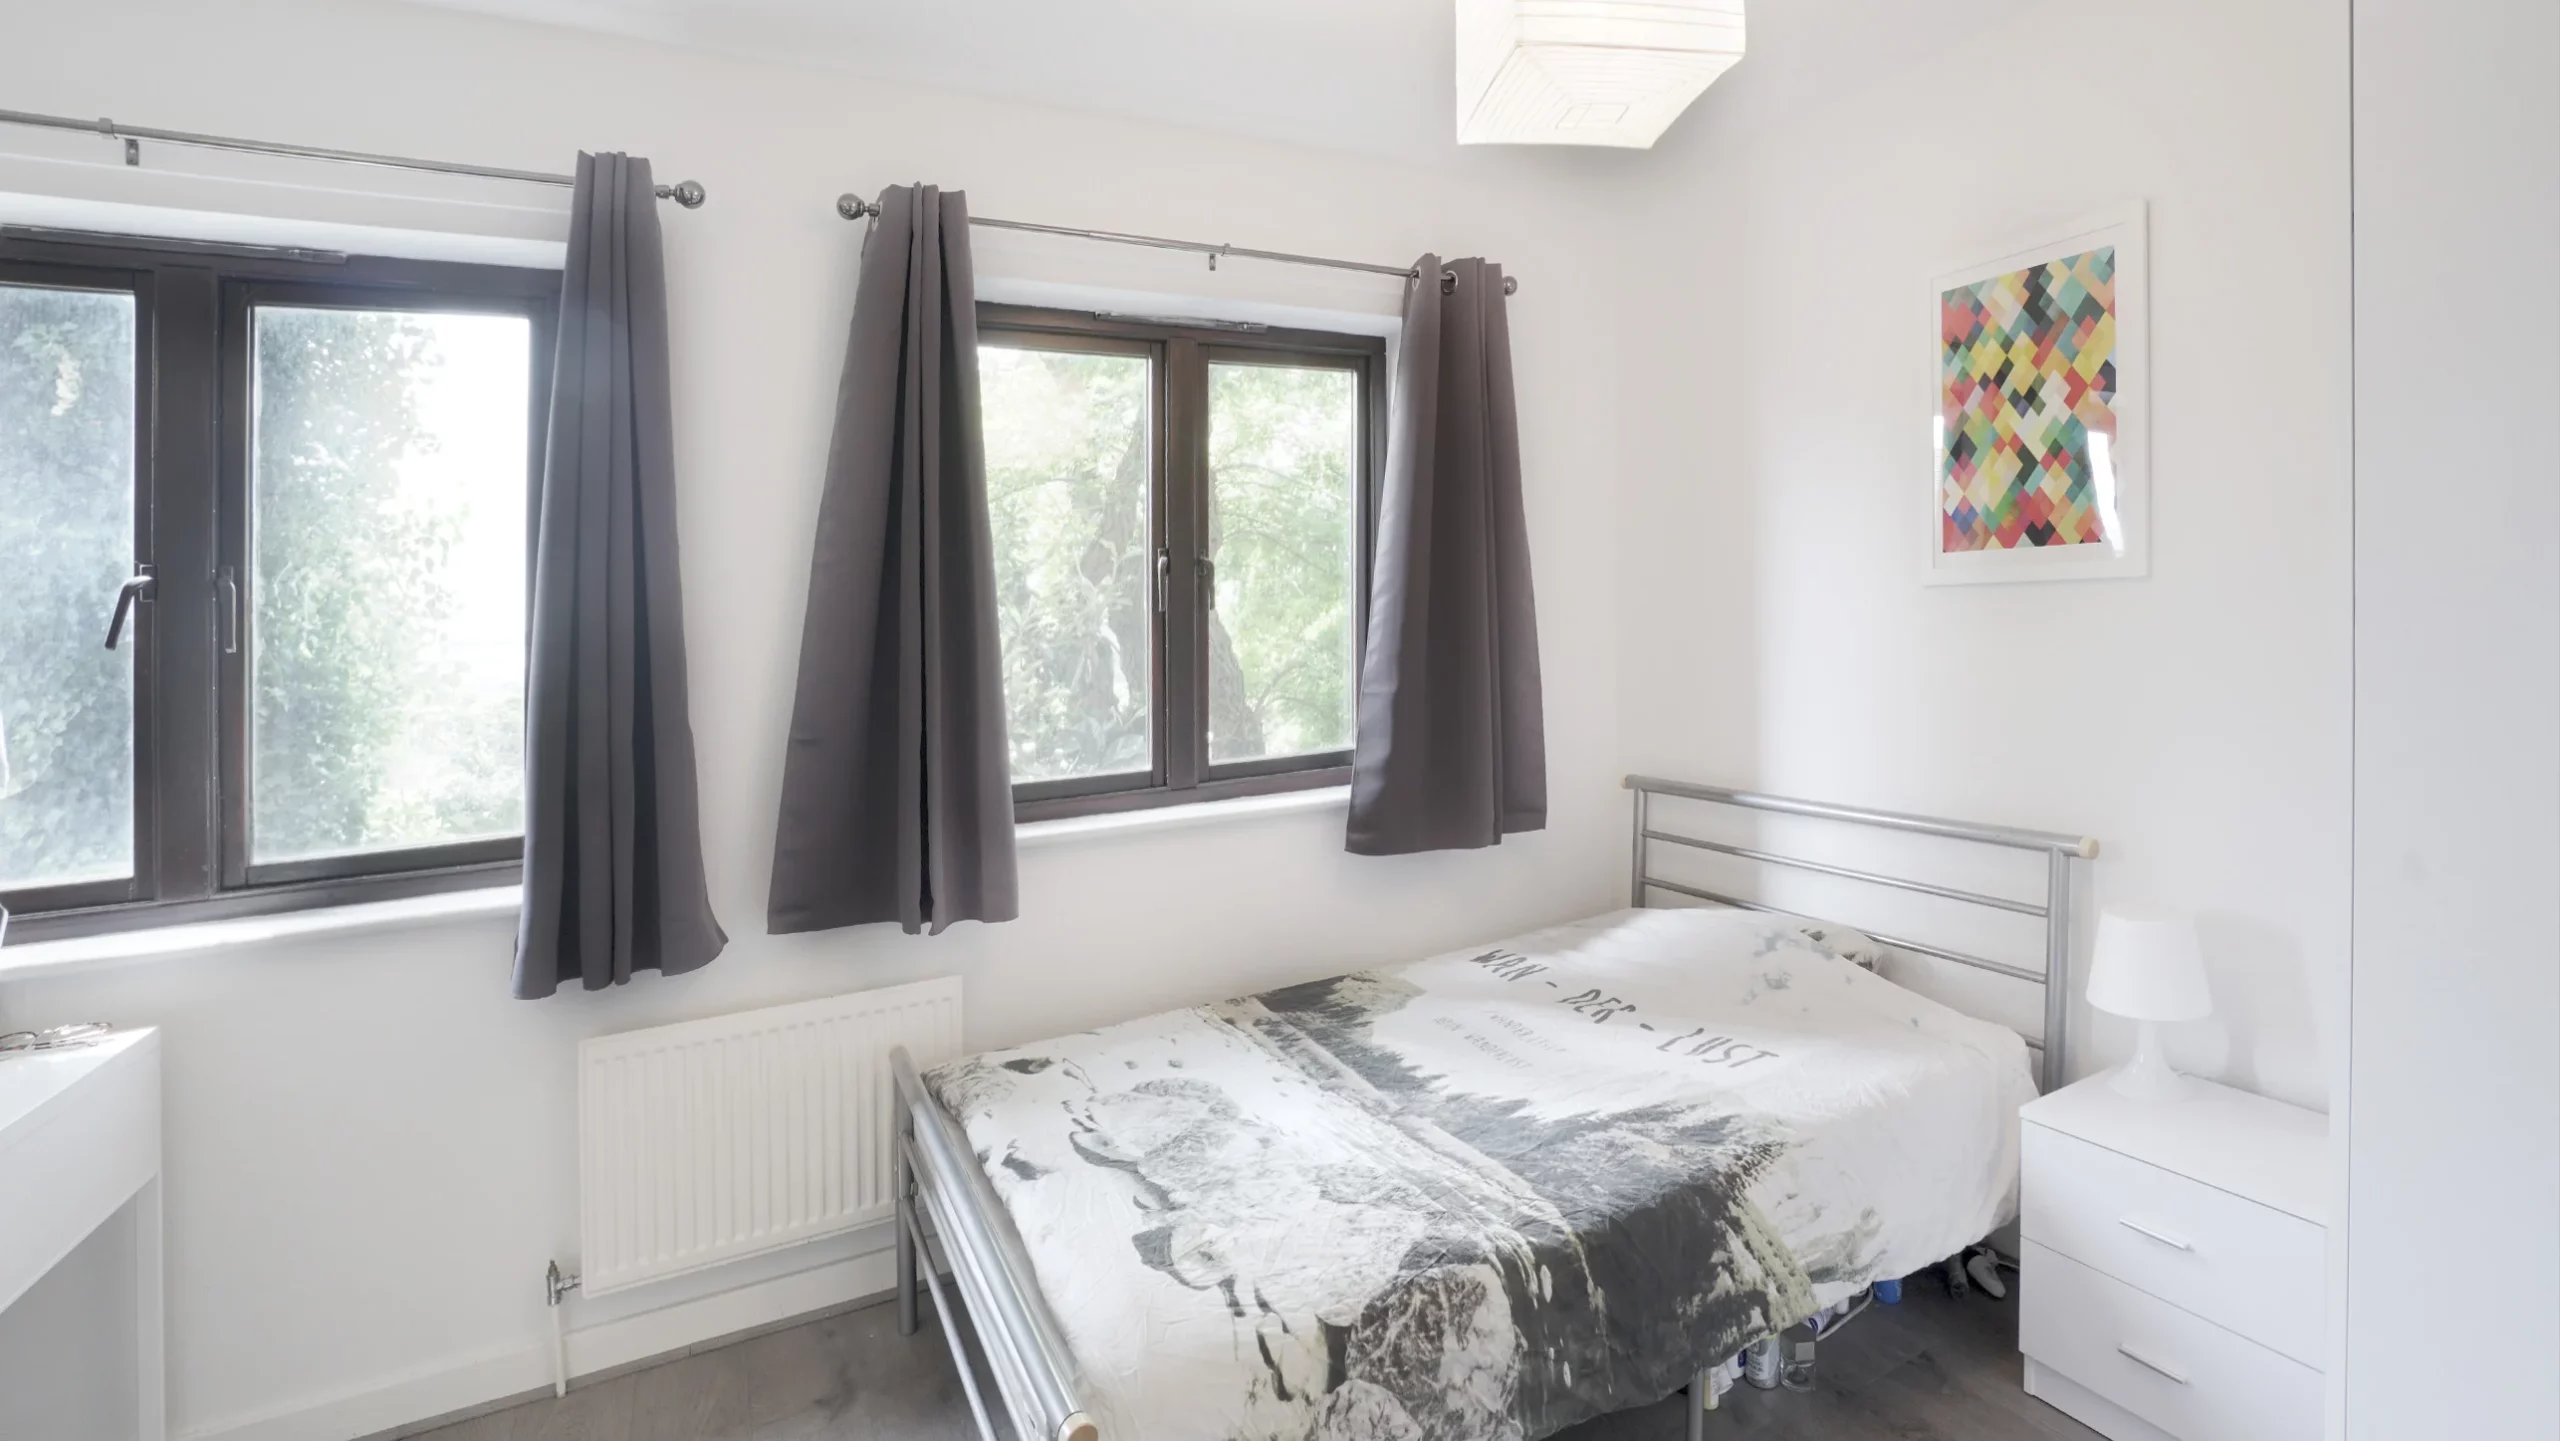 Five Bedroom Flat Located in Leyton